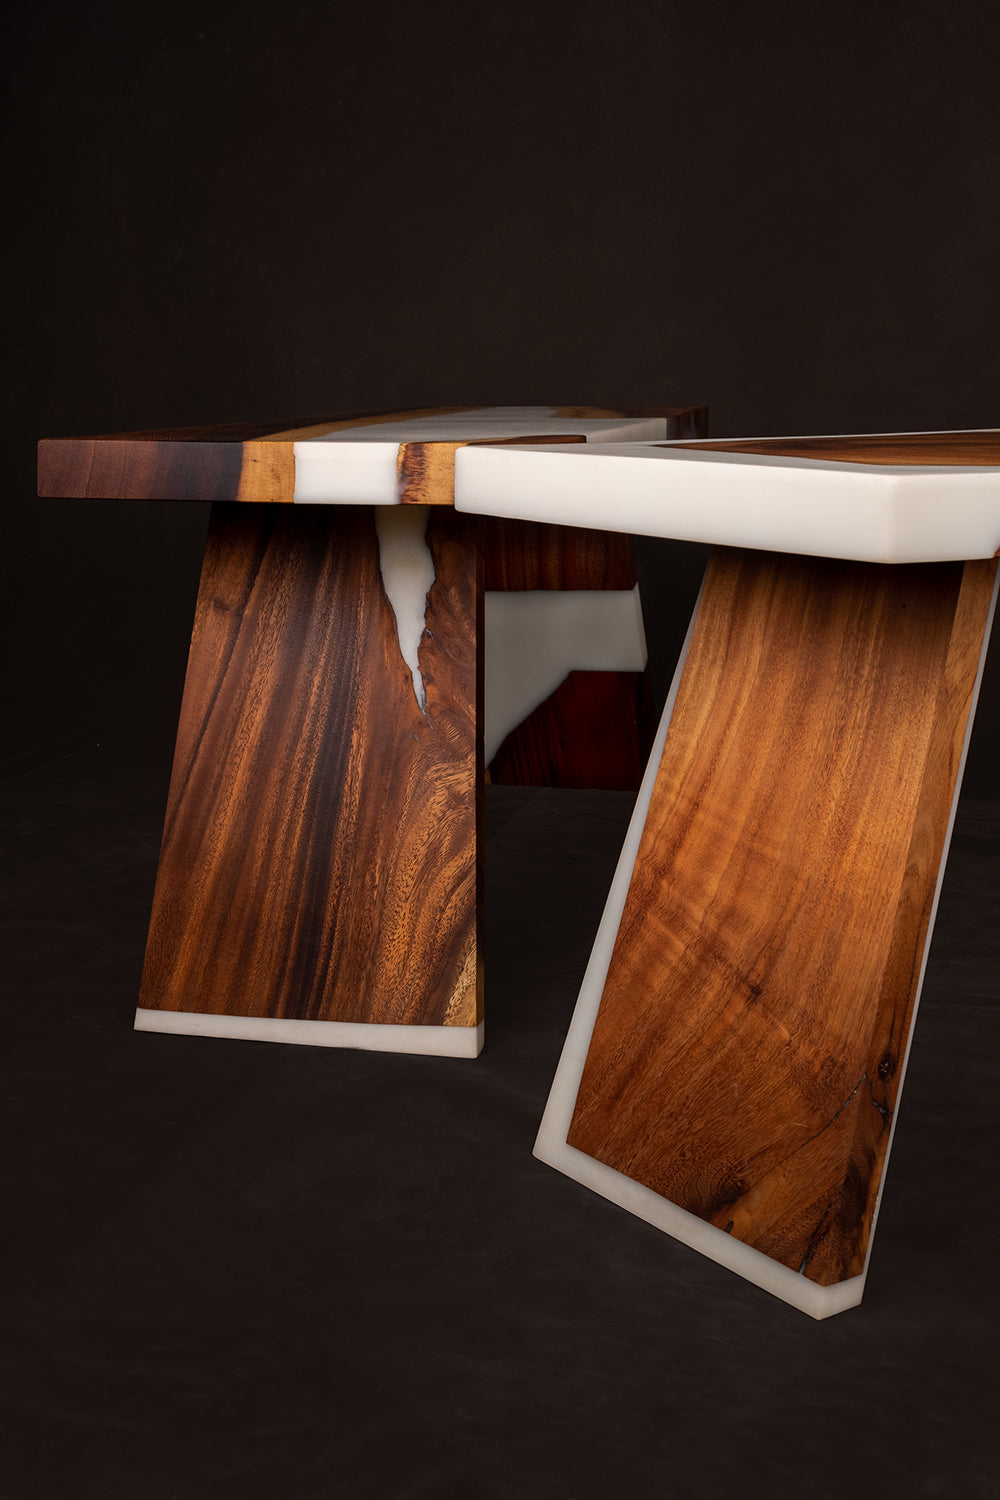 The Utsaah Wood and Resin Bench